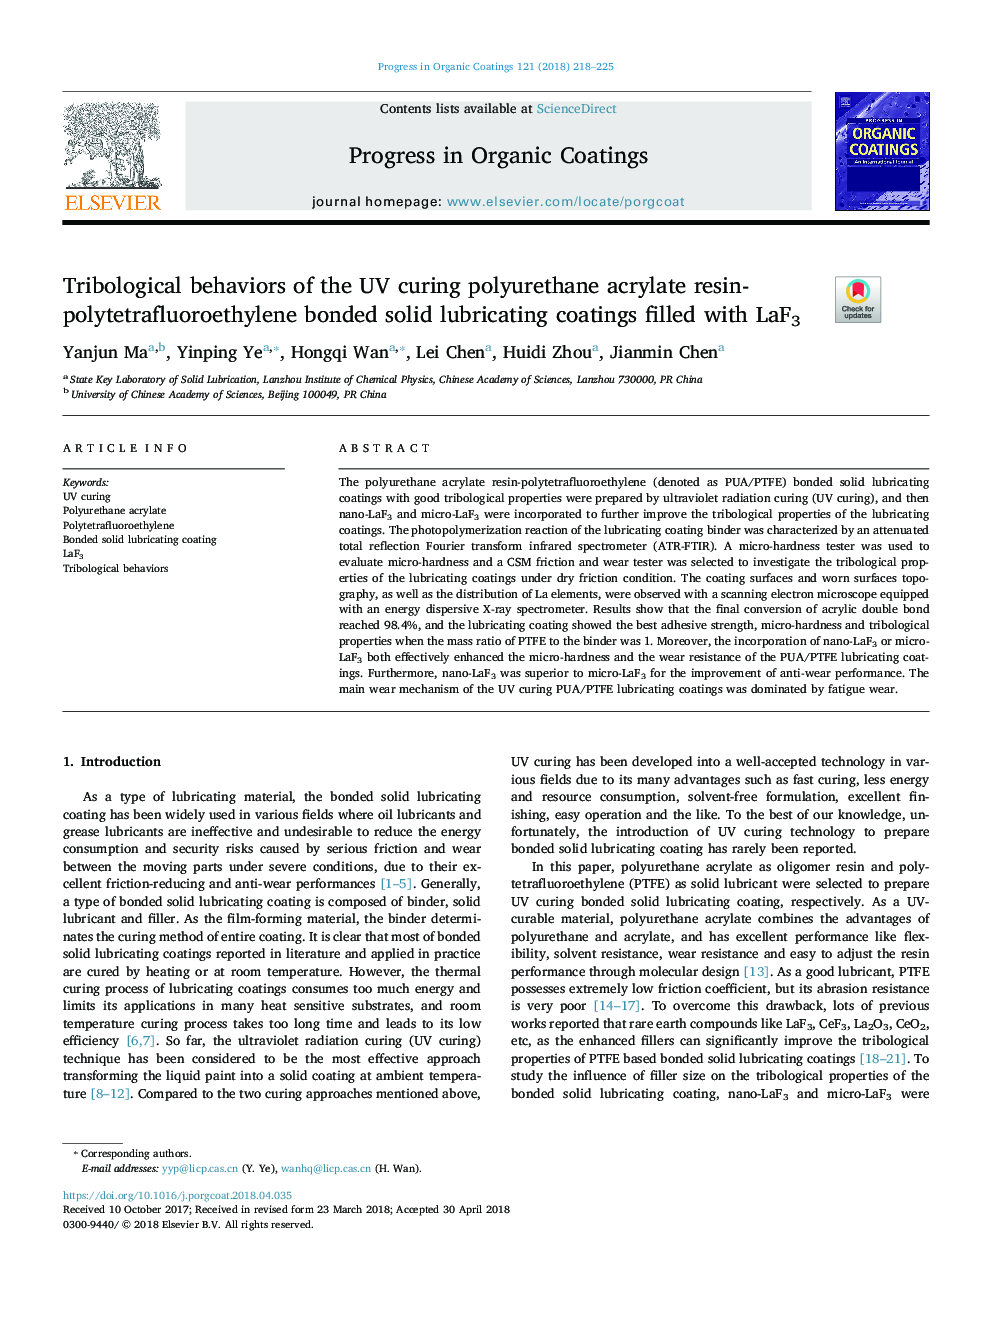 Tribological behaviors of the UV curing polyurethane acrylate resin- polytetrafluoroethylene bonded solid lubricating coatings filled with LaF3